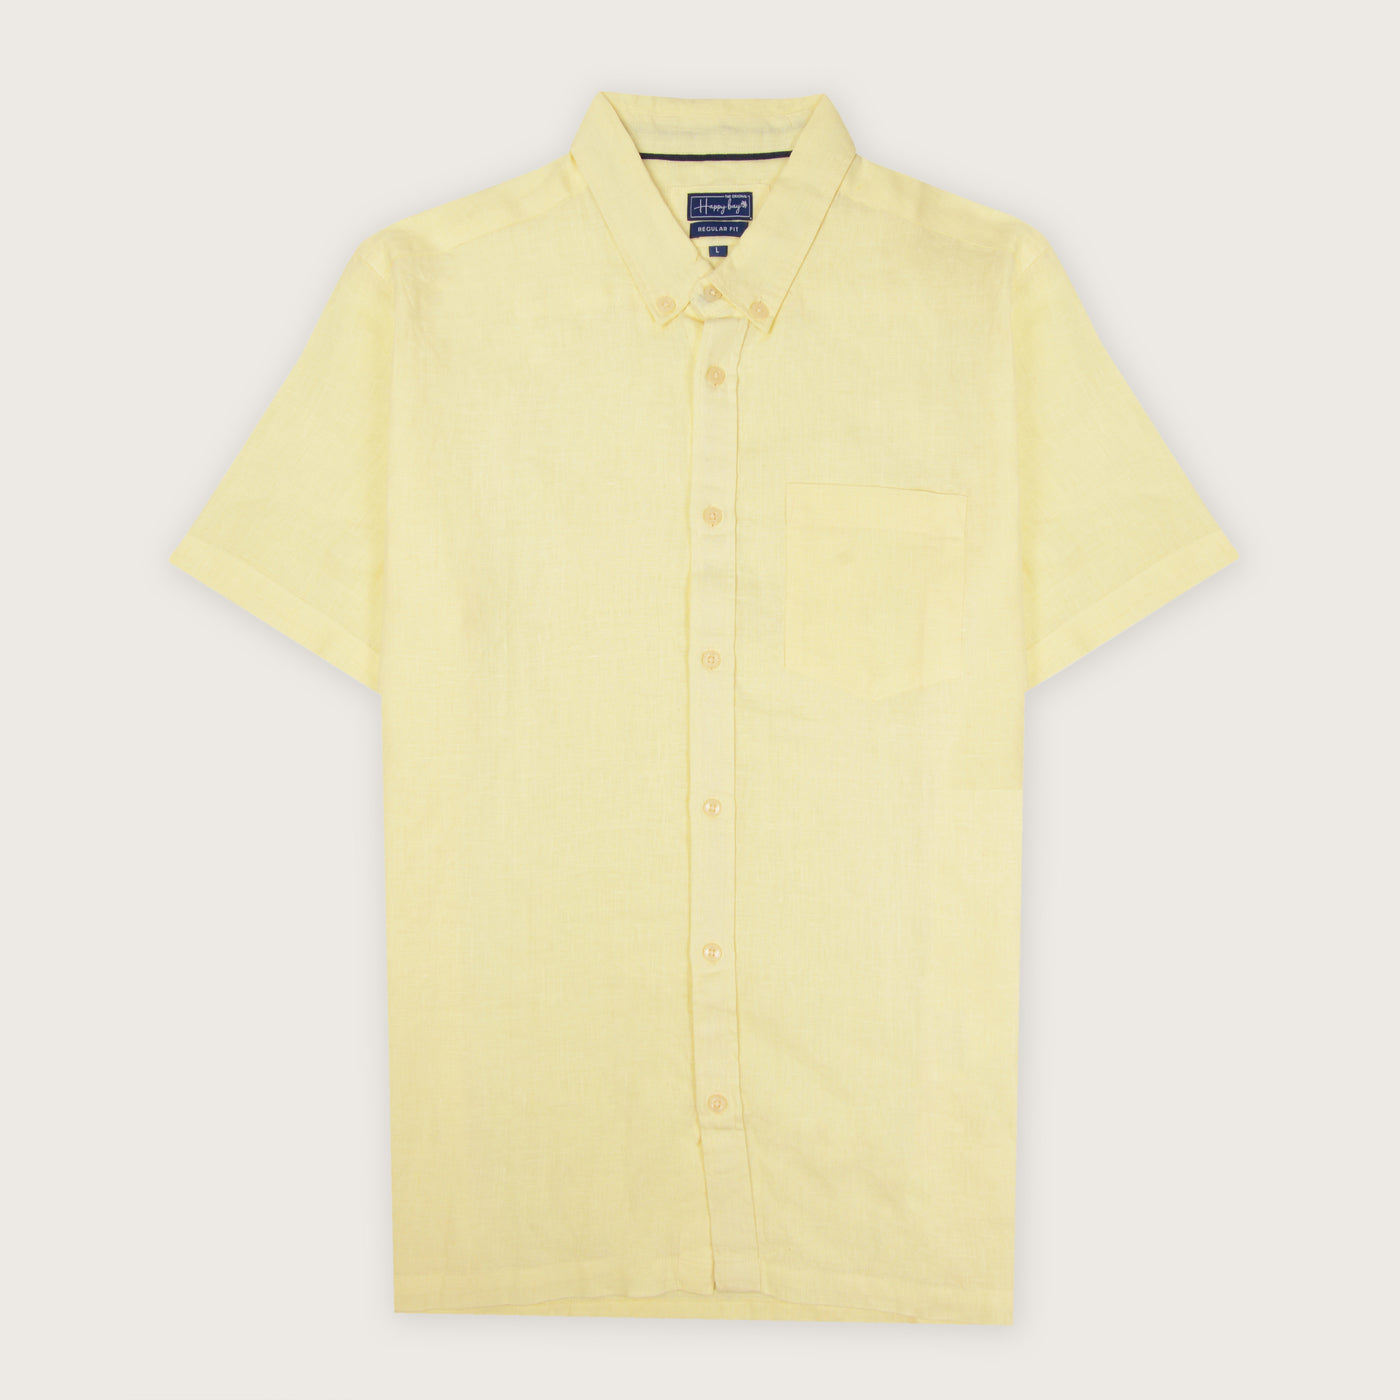 Buy now pure linen blonde ambition shirt